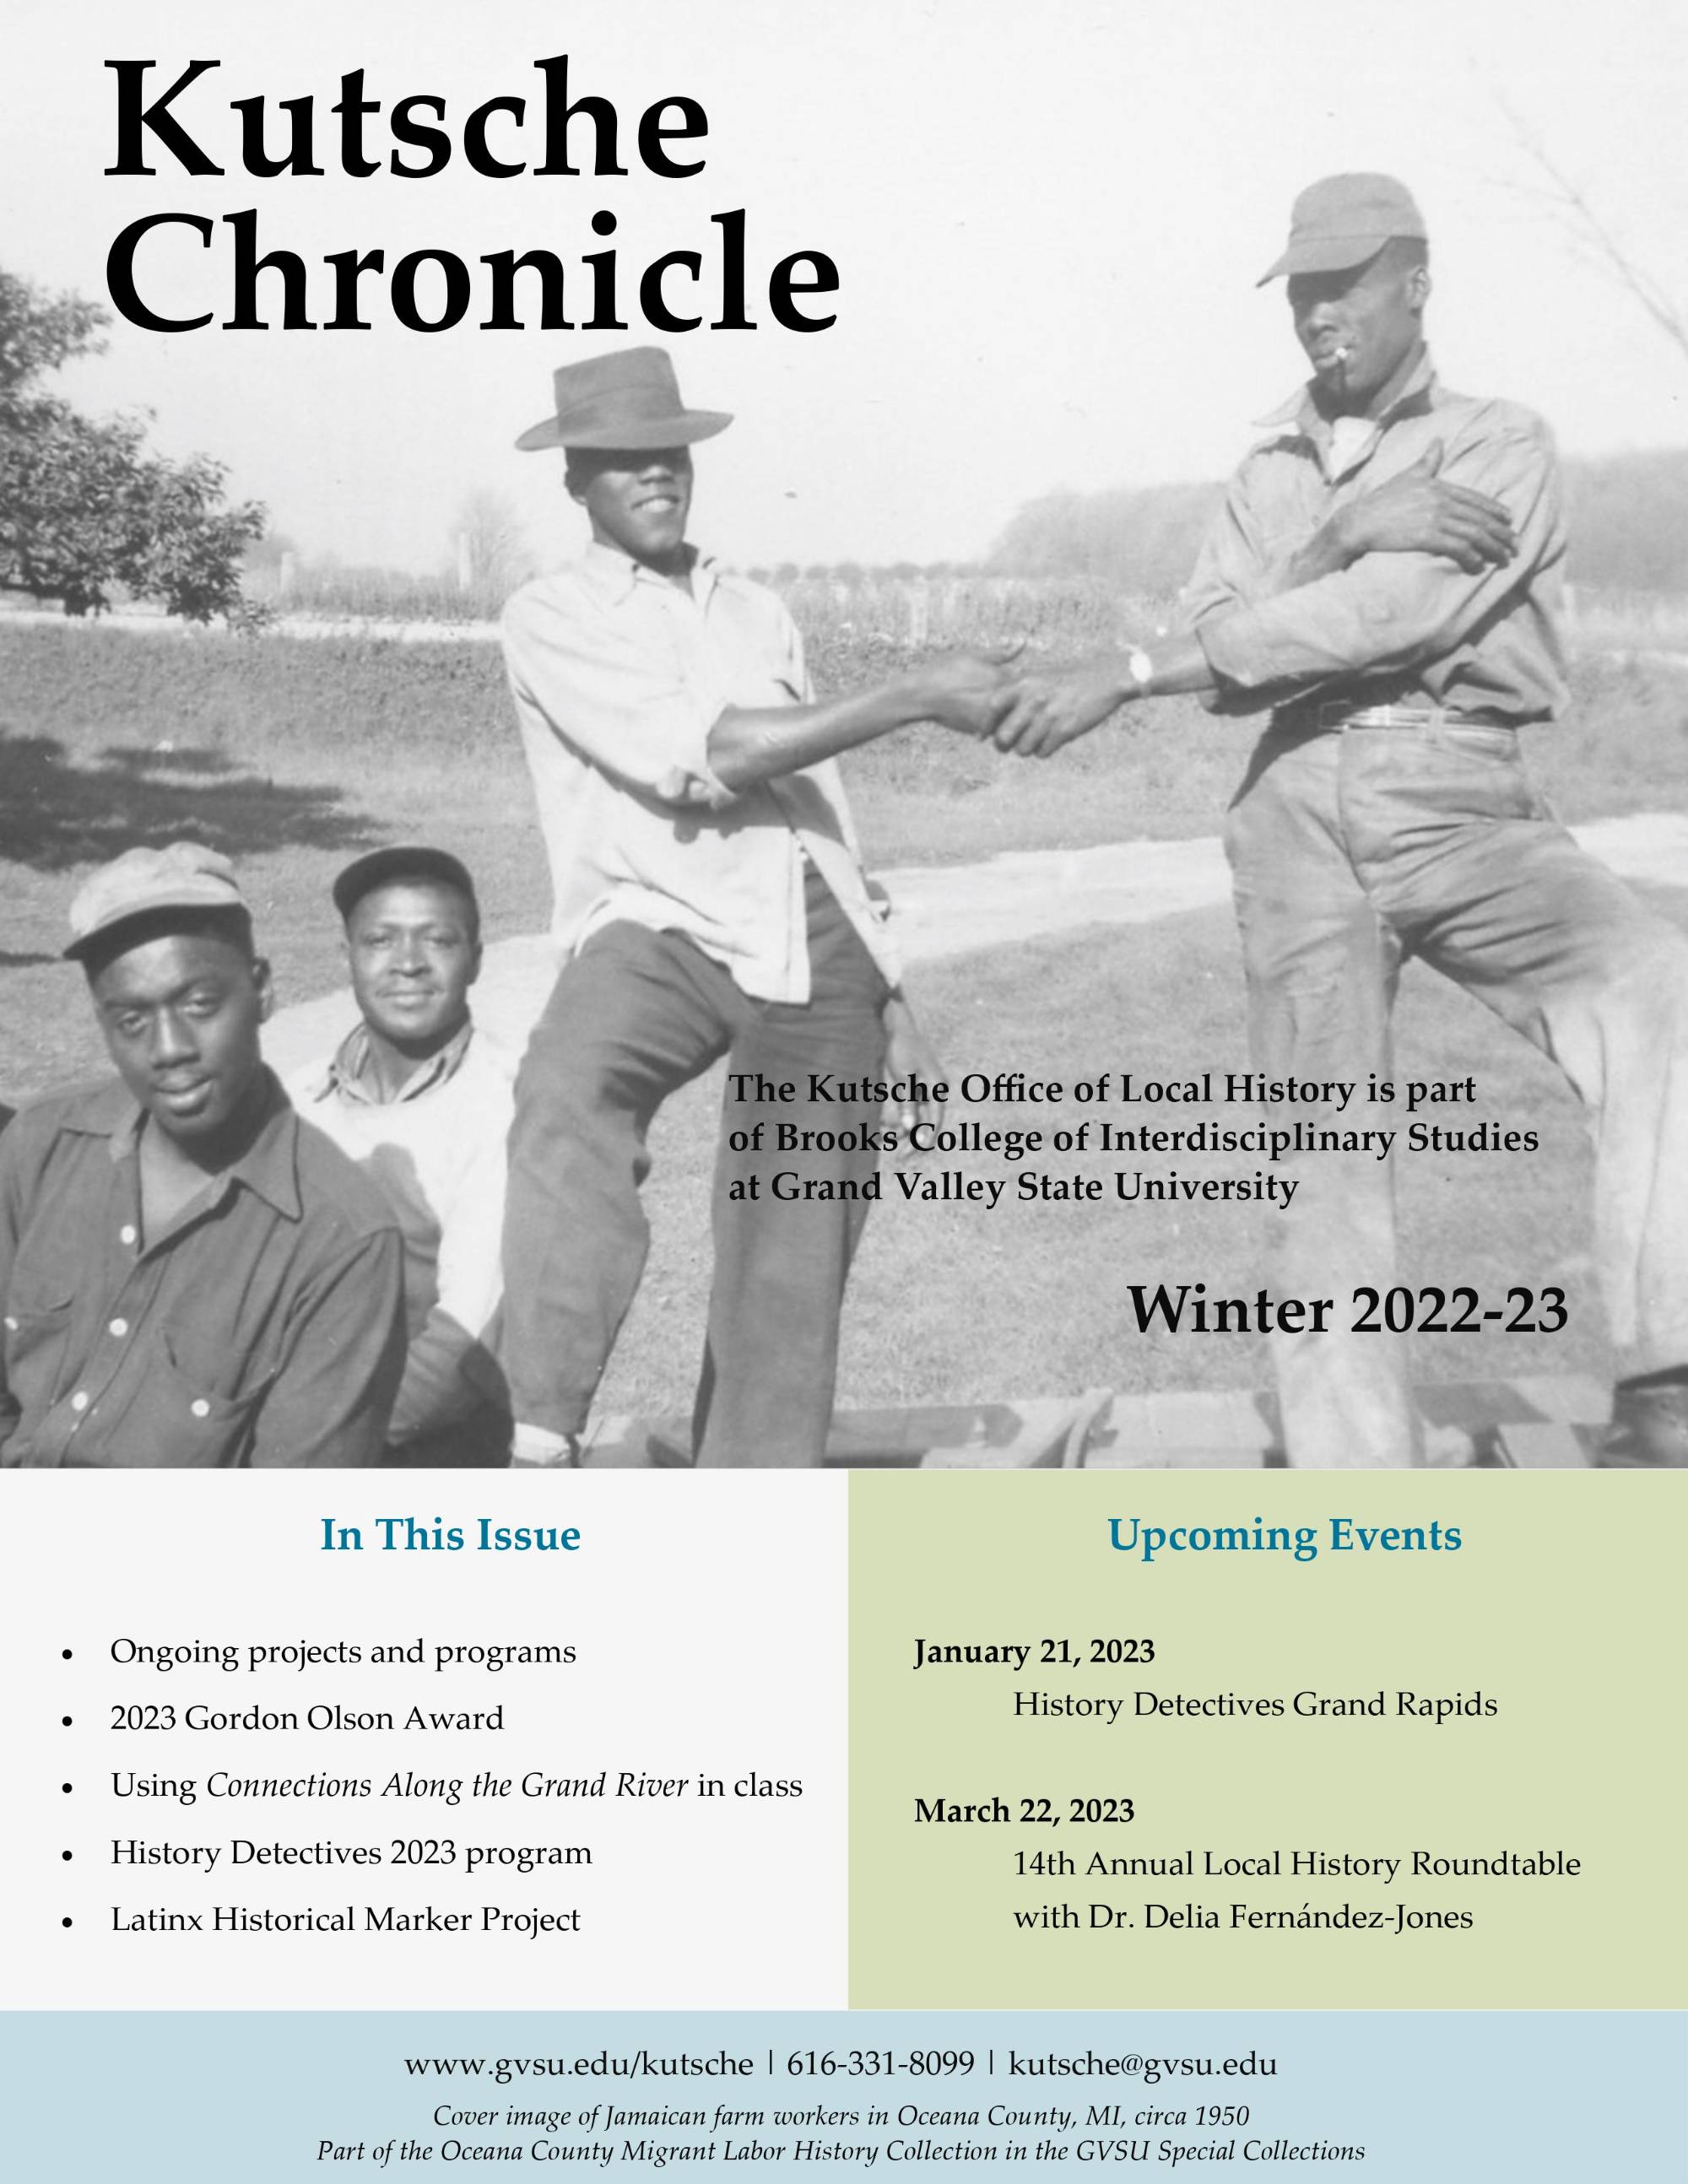 Cover of the Winter 2022-2023 Kutsche Chronicle featuring a photo of Jamaican migrant workers in Oceana County, MI circa 1950.